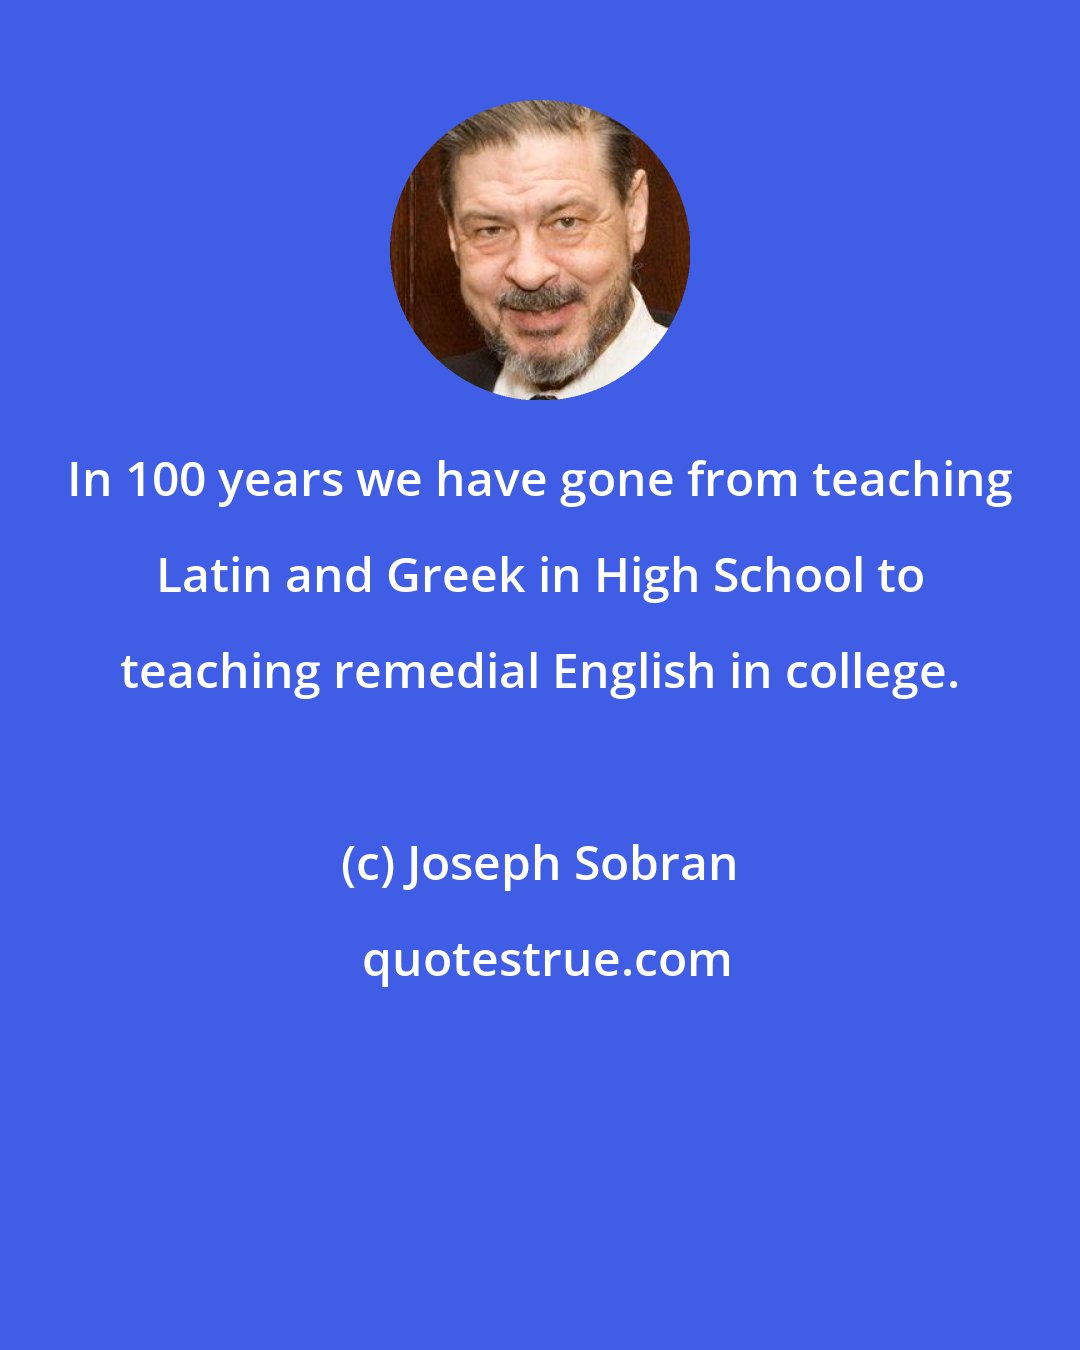 Joseph Sobran: In 100 years we have gone from teaching Latin and Greek in High School to teaching remedial English in college.